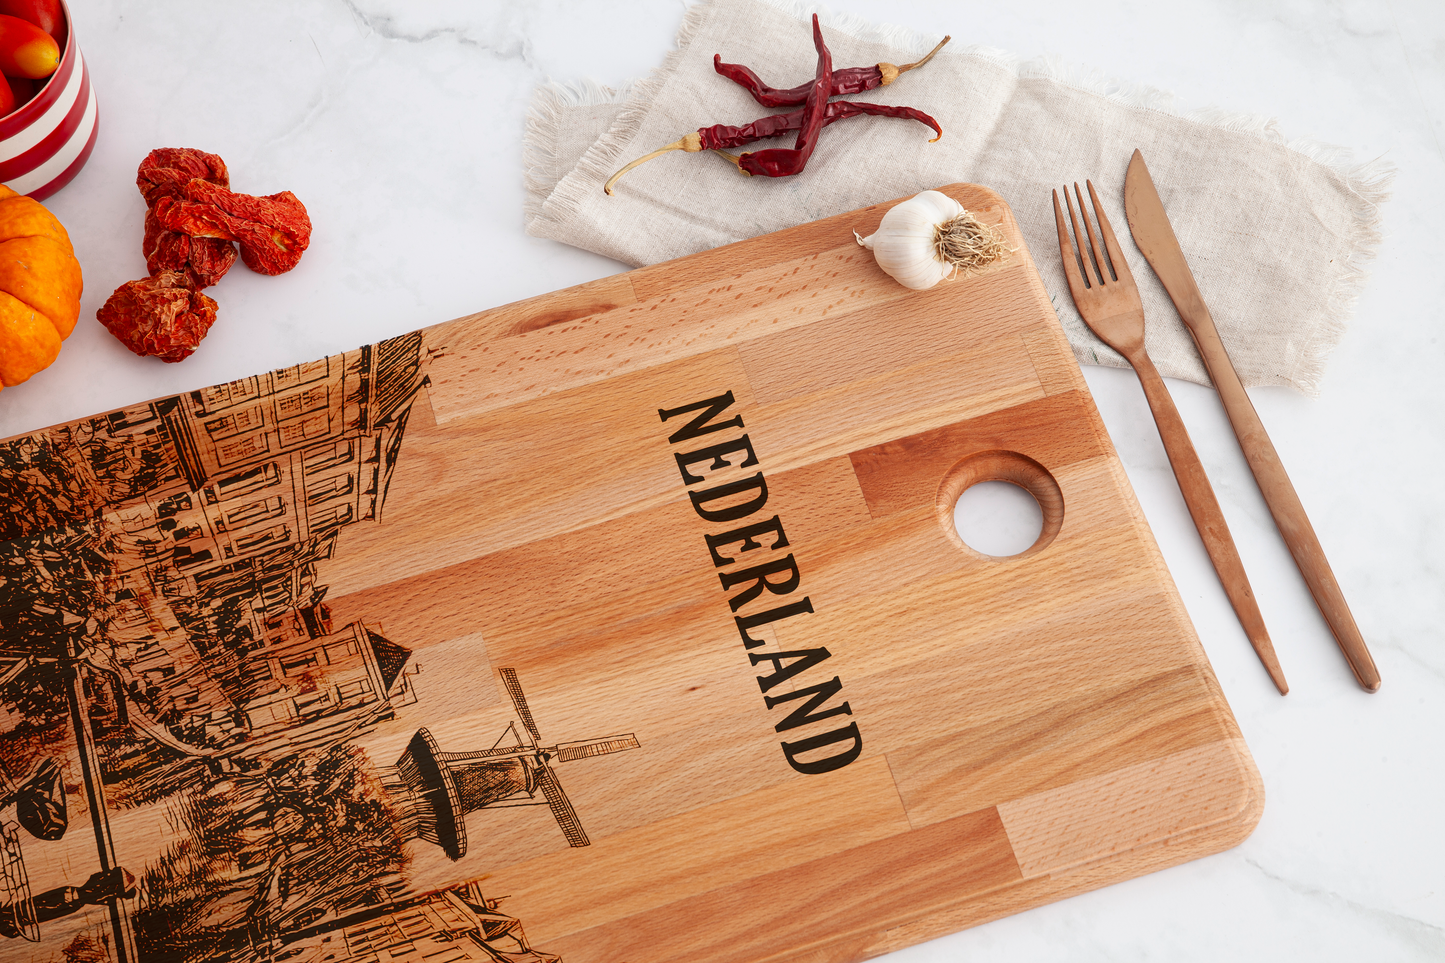 Nederland, City View, cutting board, close-up